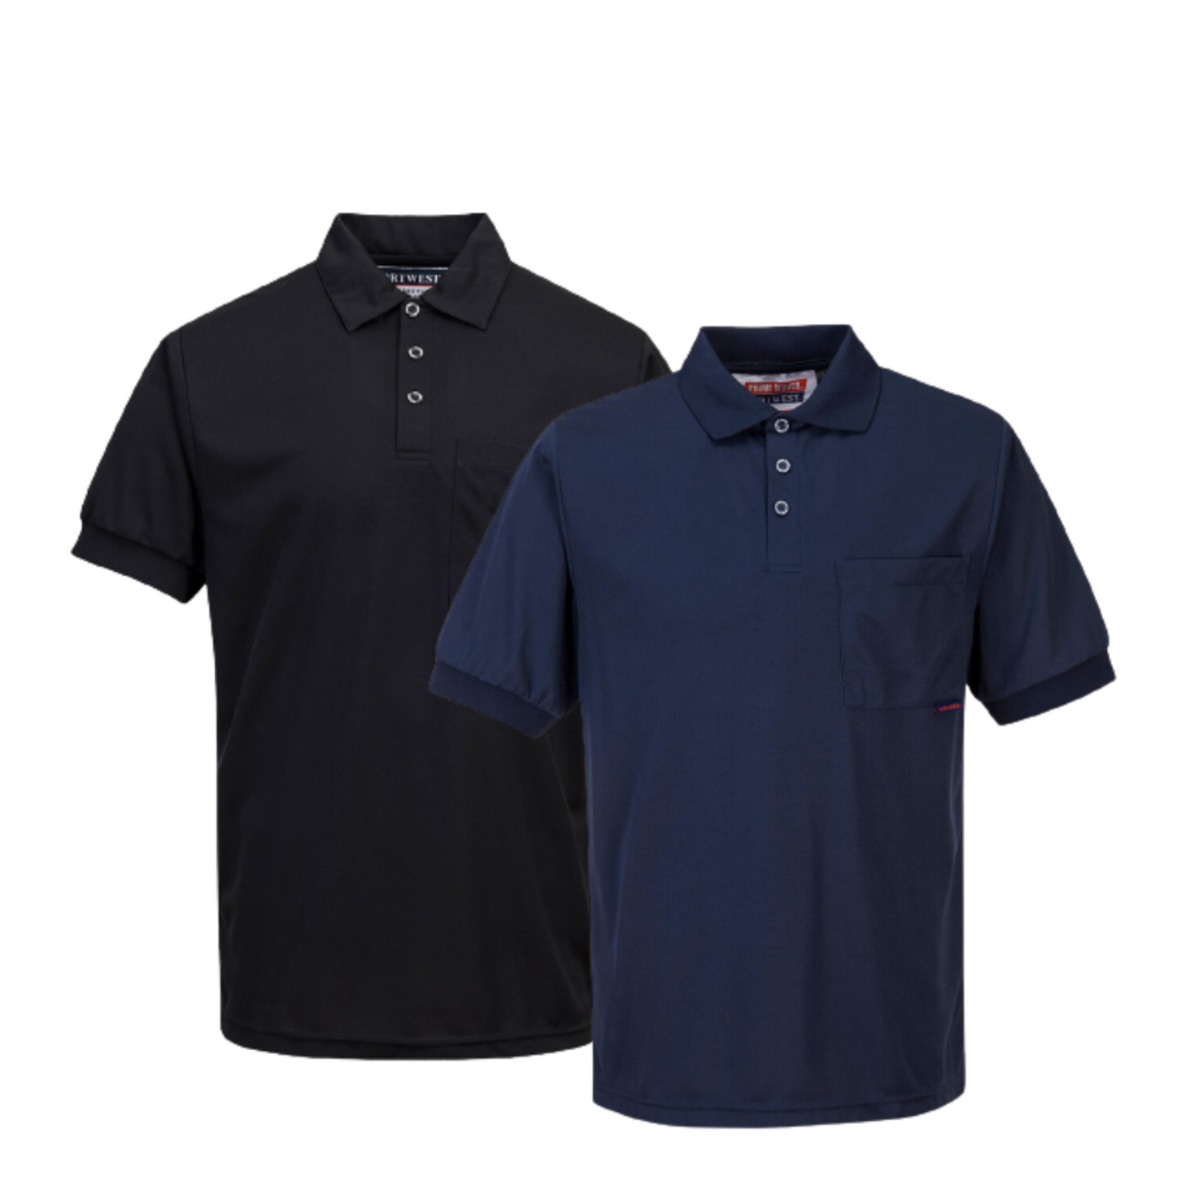 Portwest Short Sleeve Solid Colour Micro Mesh Polo Breathable Casual Shirt MP101-Collins Clothing Co